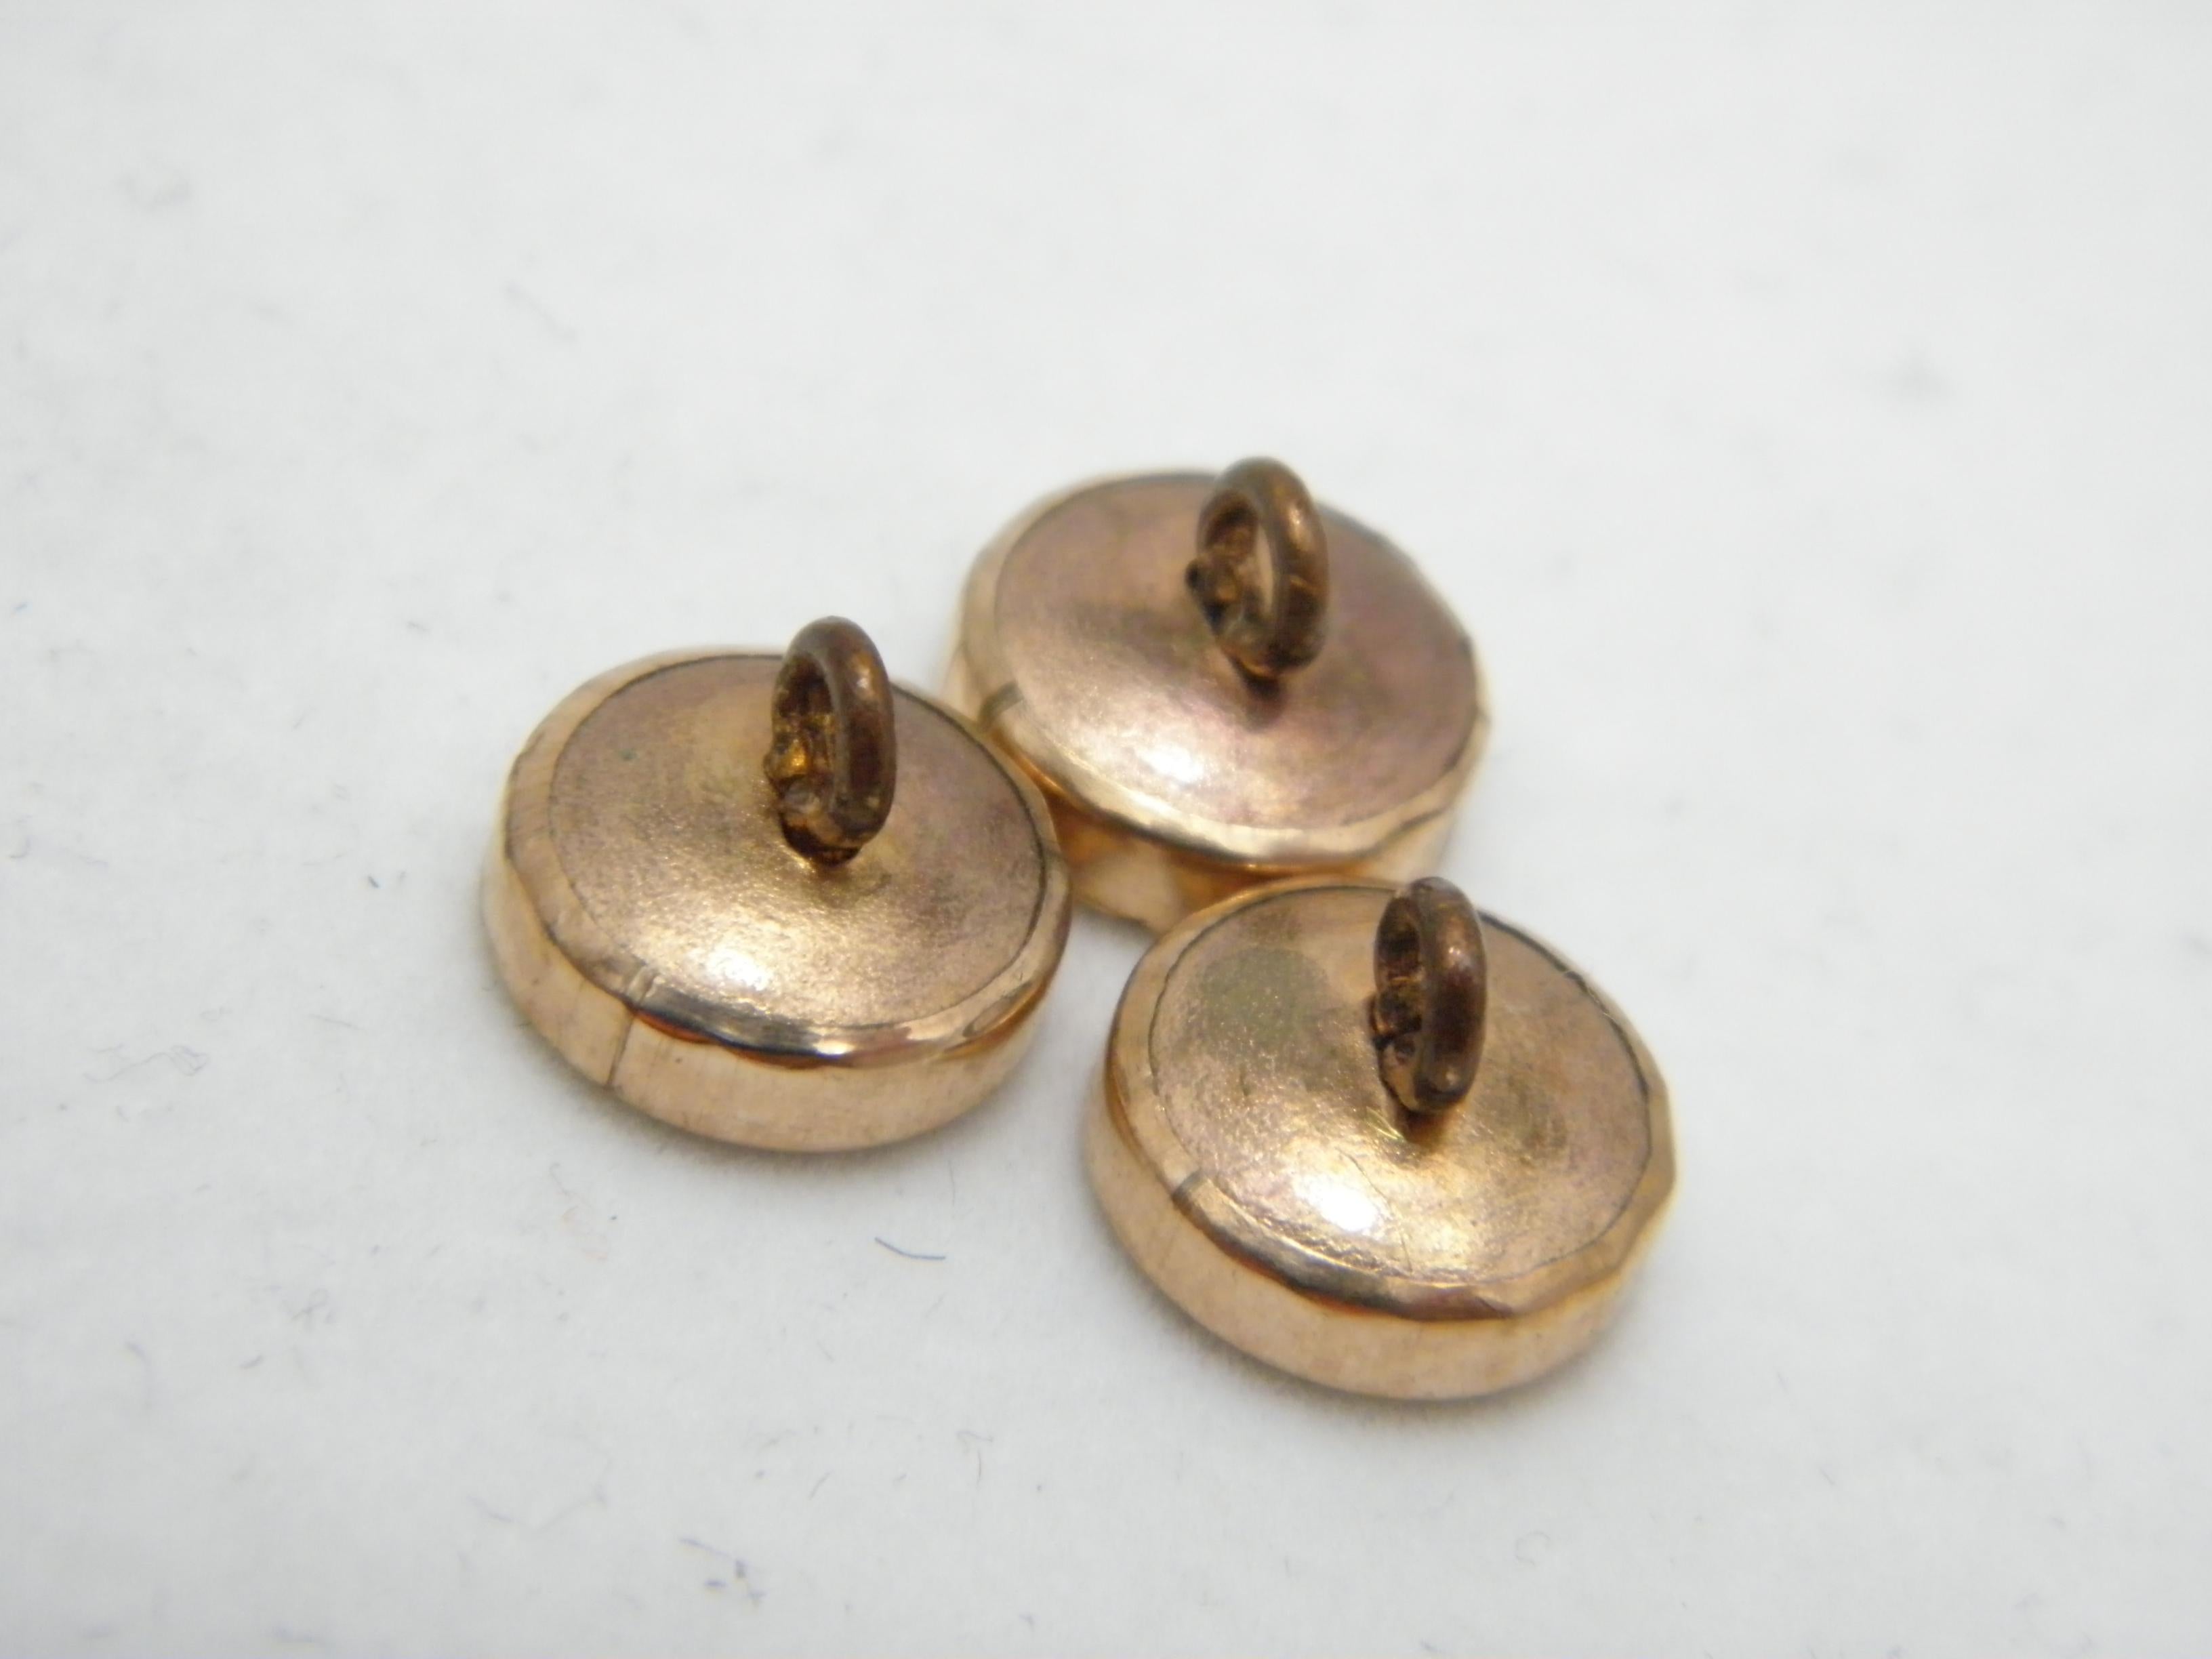 Bargain Antique 15ct Rose Gold Diamond Paste Shirt Studs Buttons c1860 625 In Good Condition For Sale In Camelford, GB